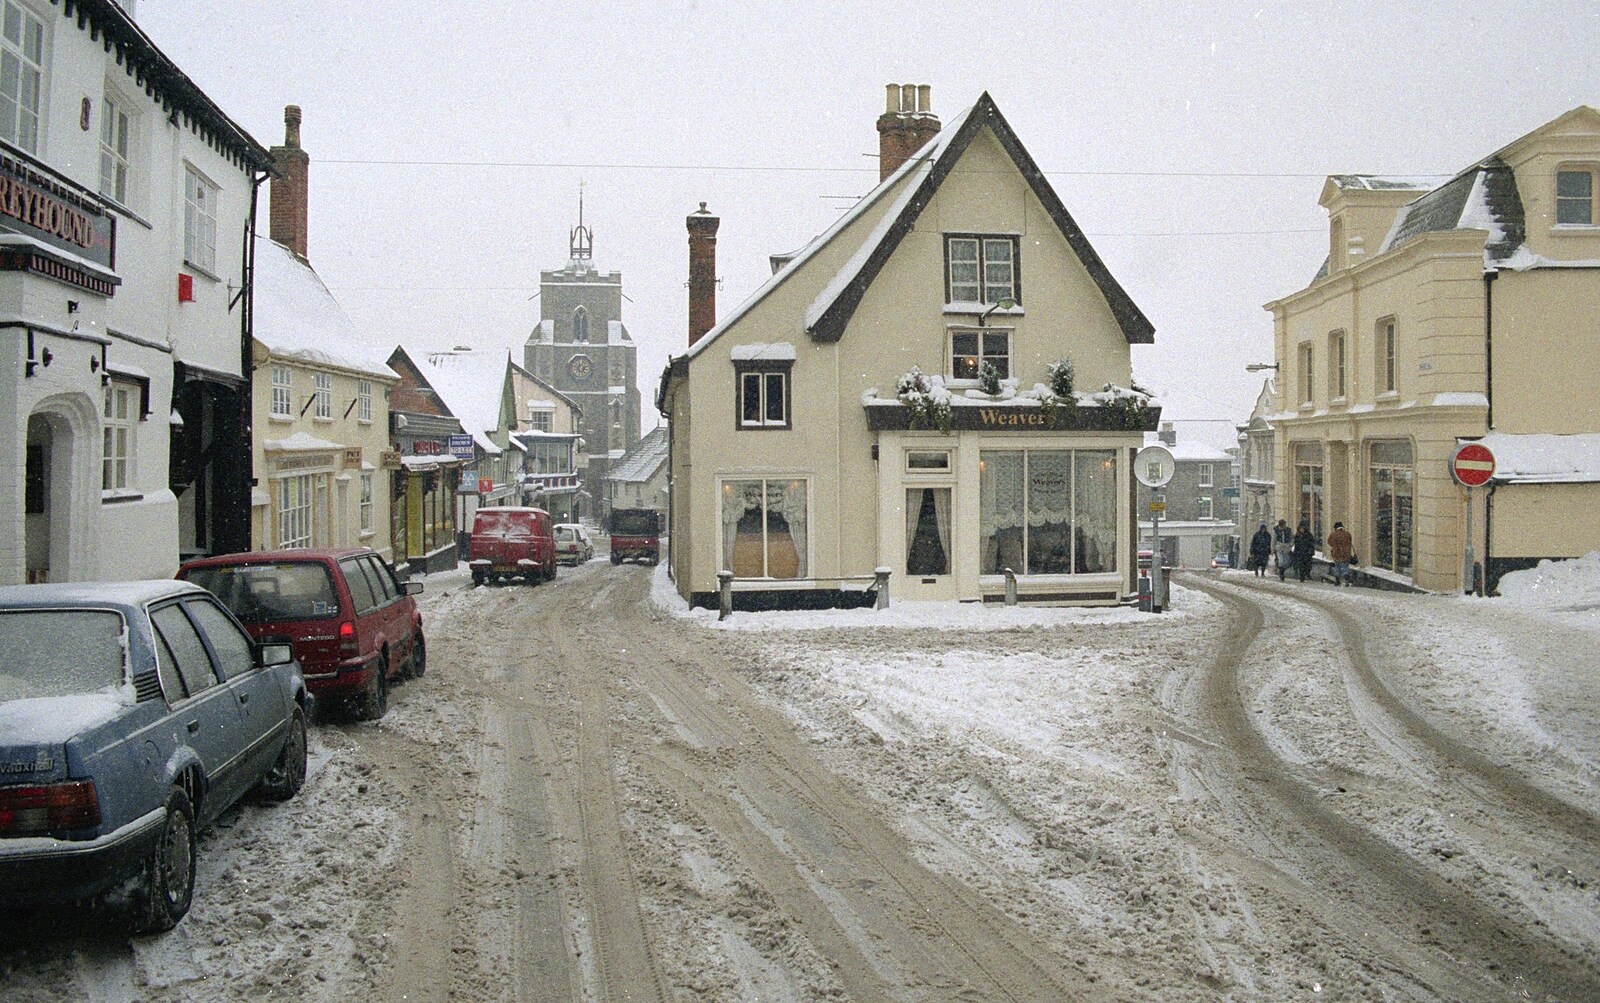 Weavers on St. Nicholas Street in Diss from Sledging on the Common and Some Music, Stuston, Suffolk - 5th February 1991